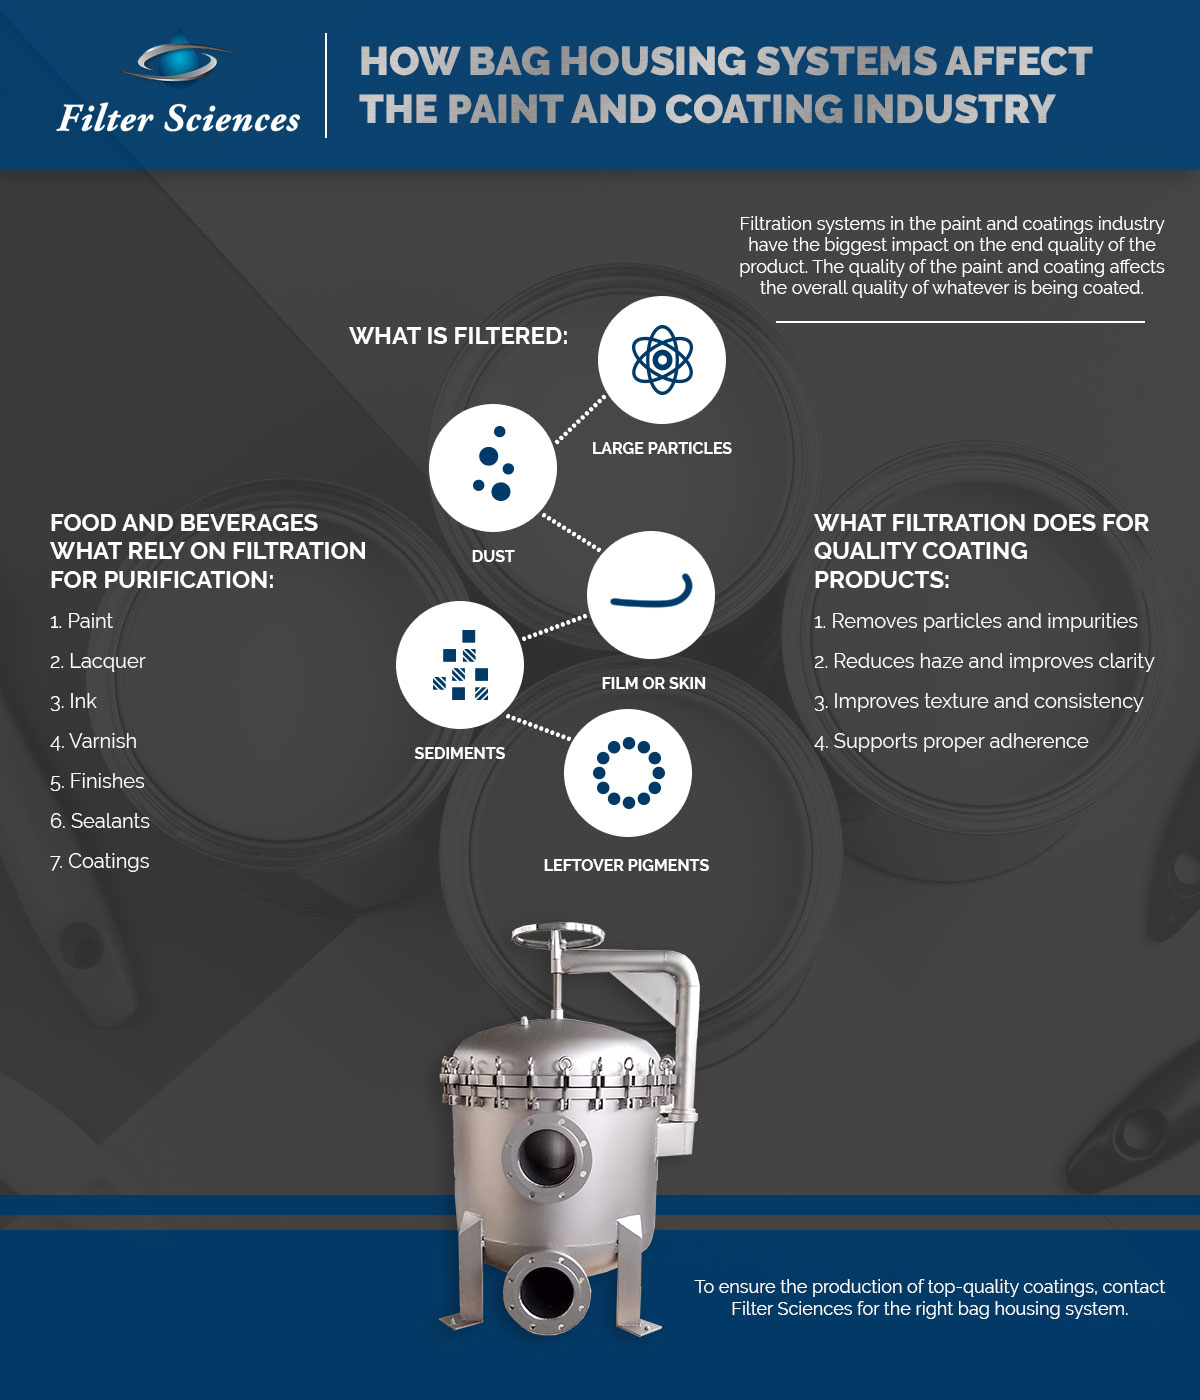 How-Bag-Housing-Systems-Affect-the-Paint-and-Coating-Industry-5d2c983e9b12b